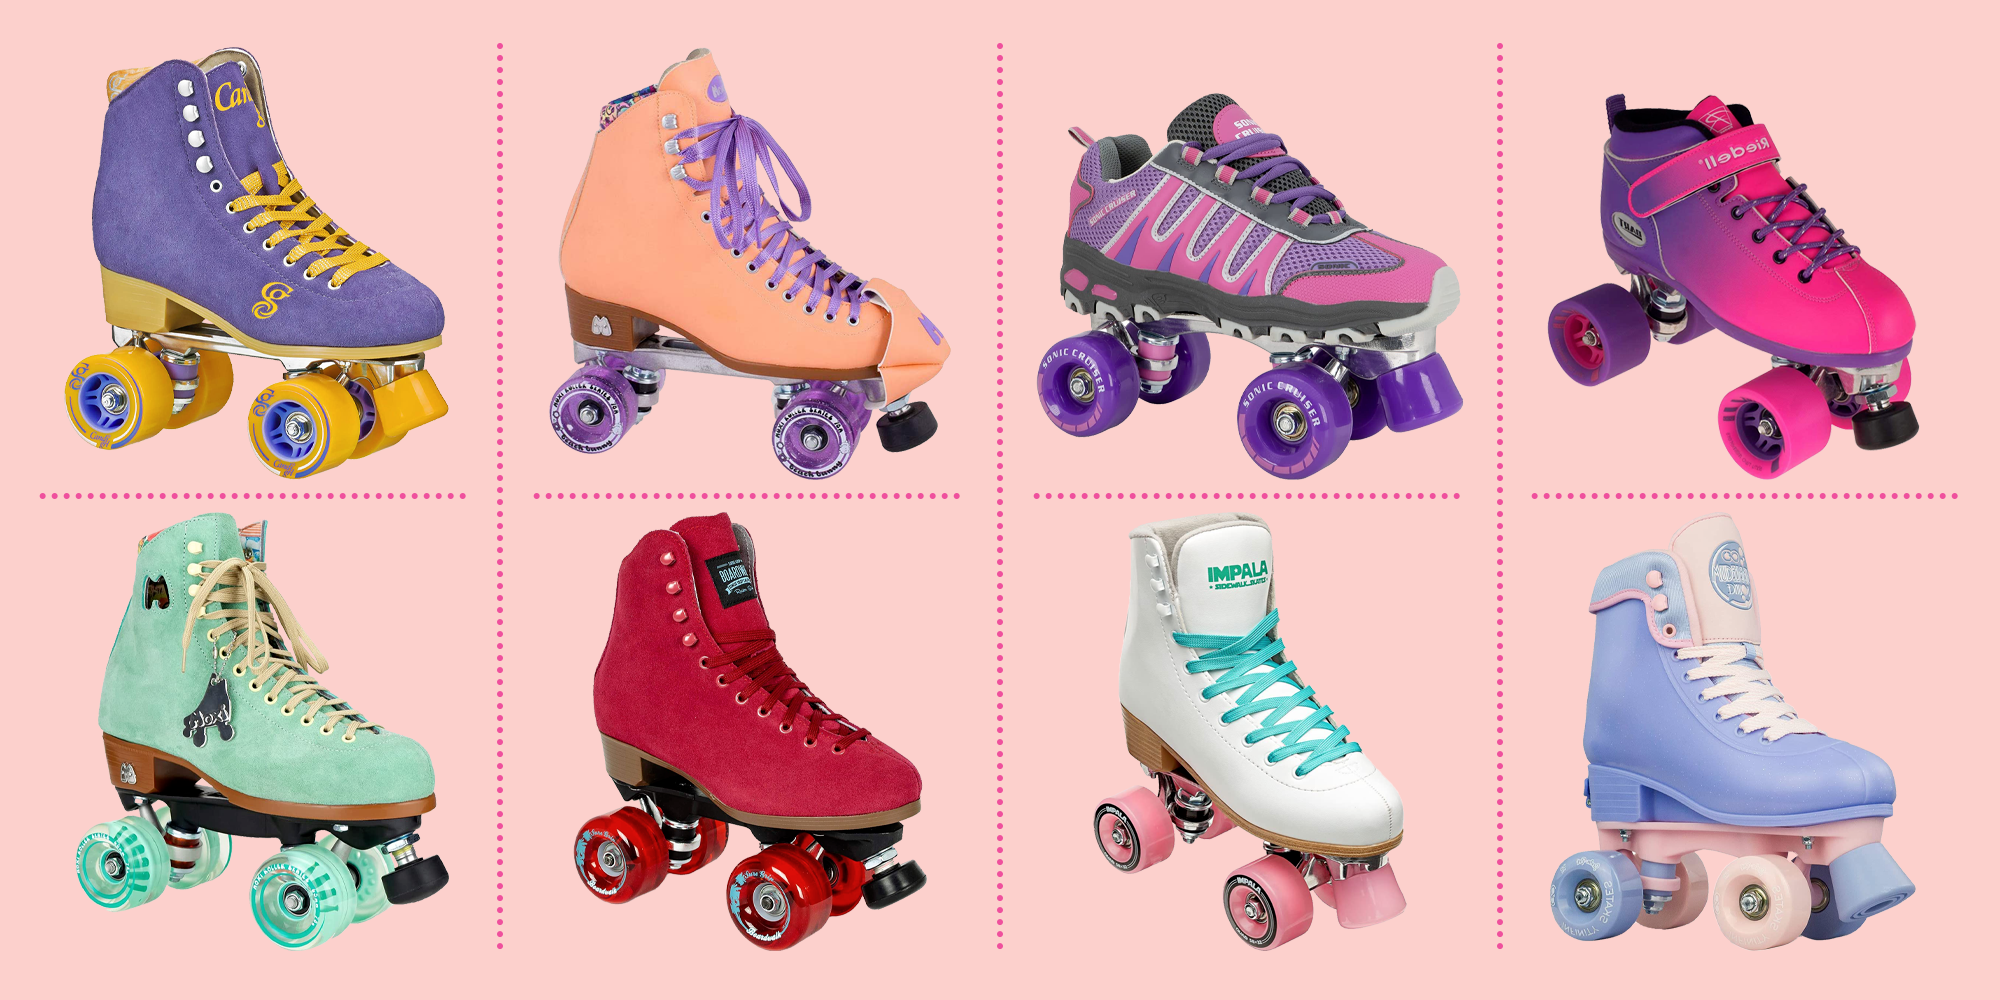 Roller Skates for Women Cozy Green PU Leather High-top Roller Skates for Beginner Indoor Outdoor Double-Row Roller Skates with Shoes Bag 